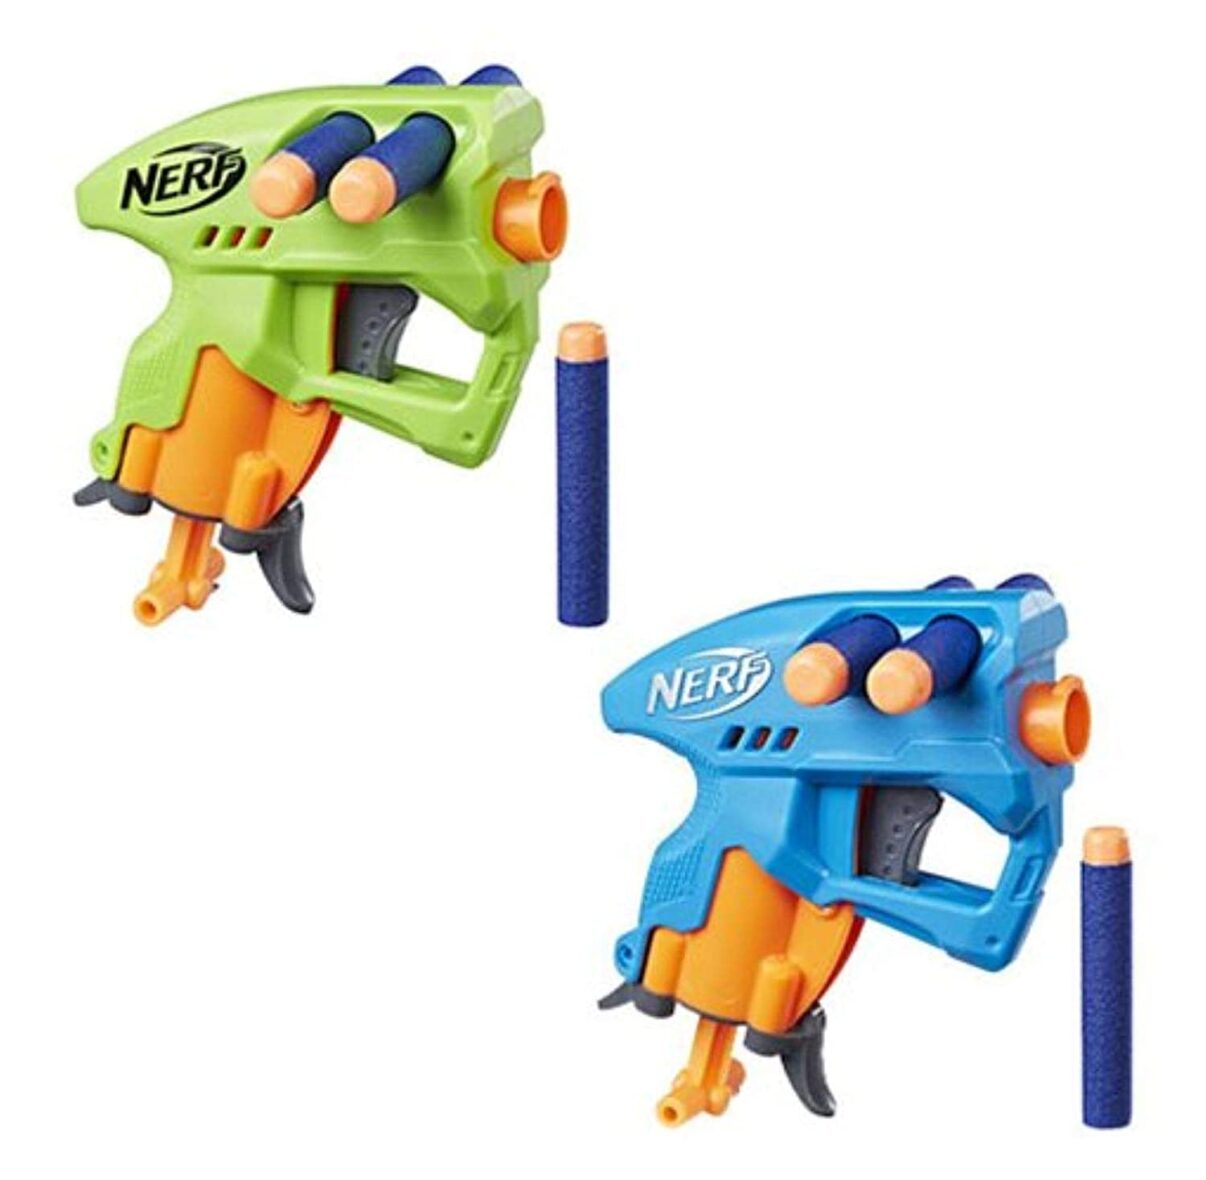 Nerf NanoFire Blaster, Green Single-Shot Blaster with Dart Storage, Includes 3 Elite Darts, For Kids Ages 8 and up